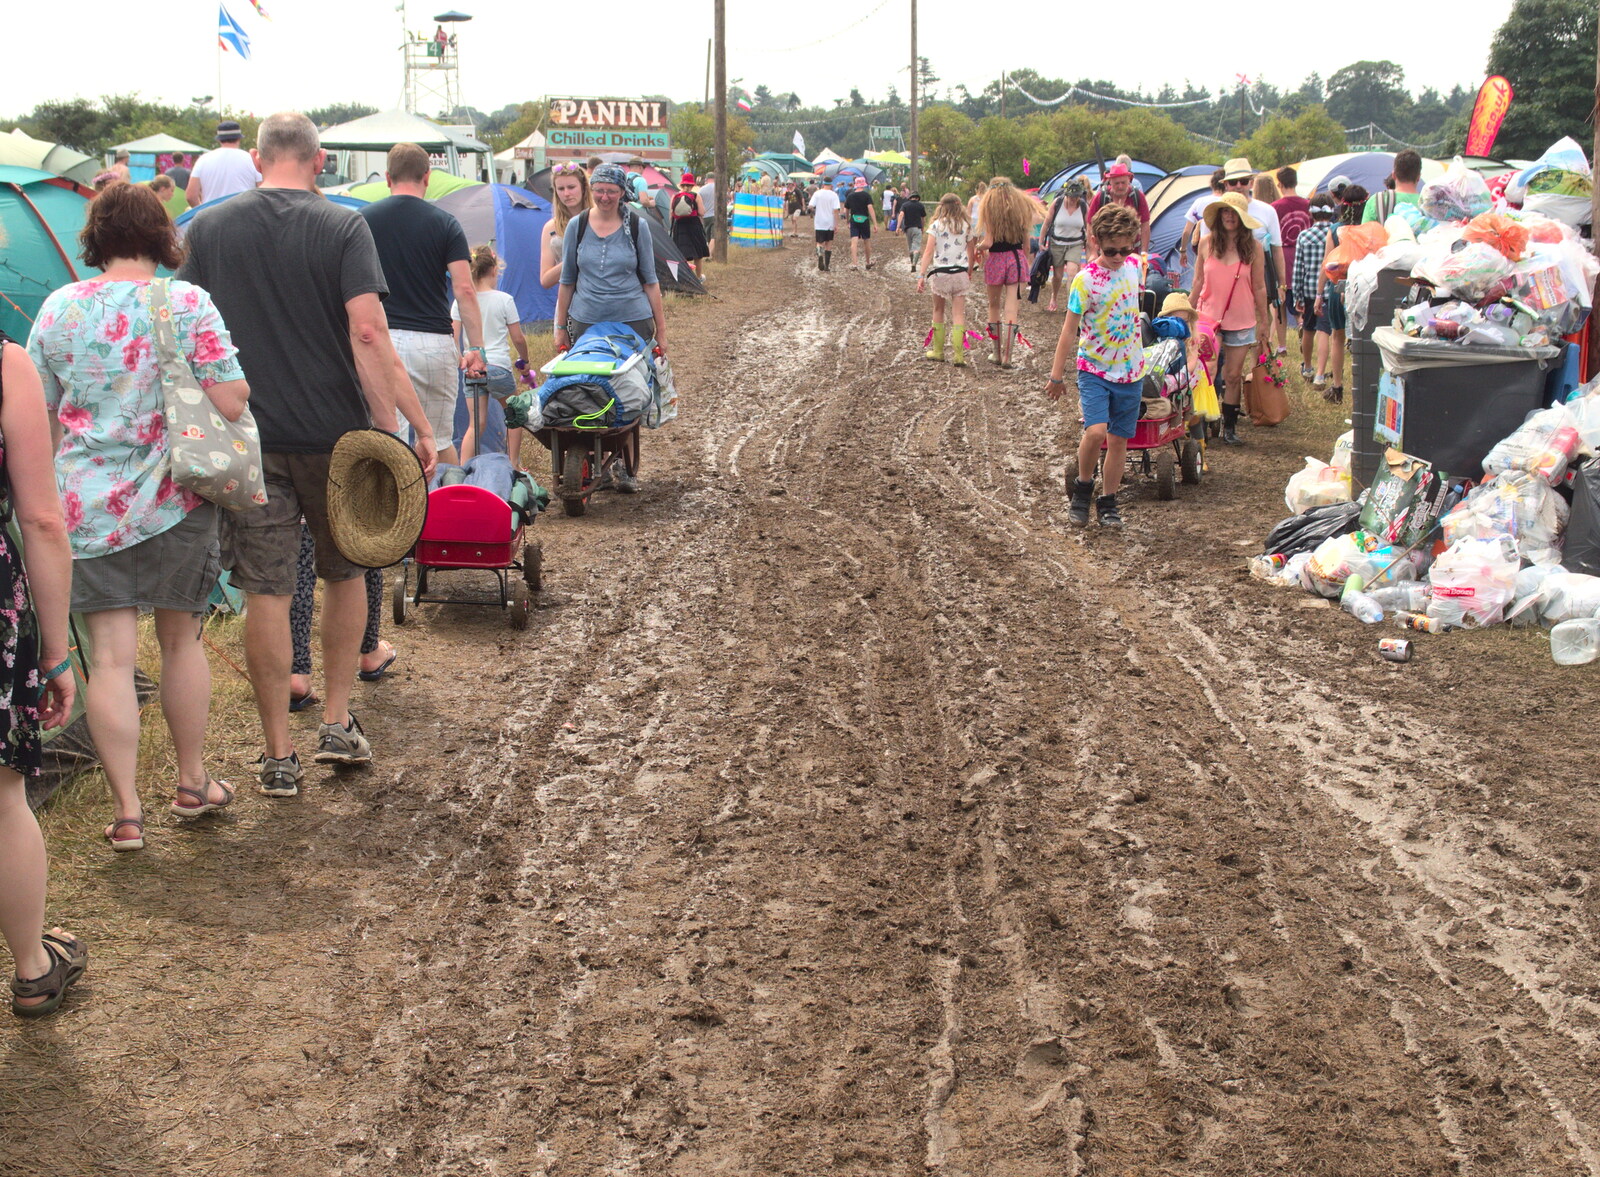 The path in has turned a bit muddy after the rain from Latitude Festival, Henham Park, Southwold, Suffolk - 17th July 2014